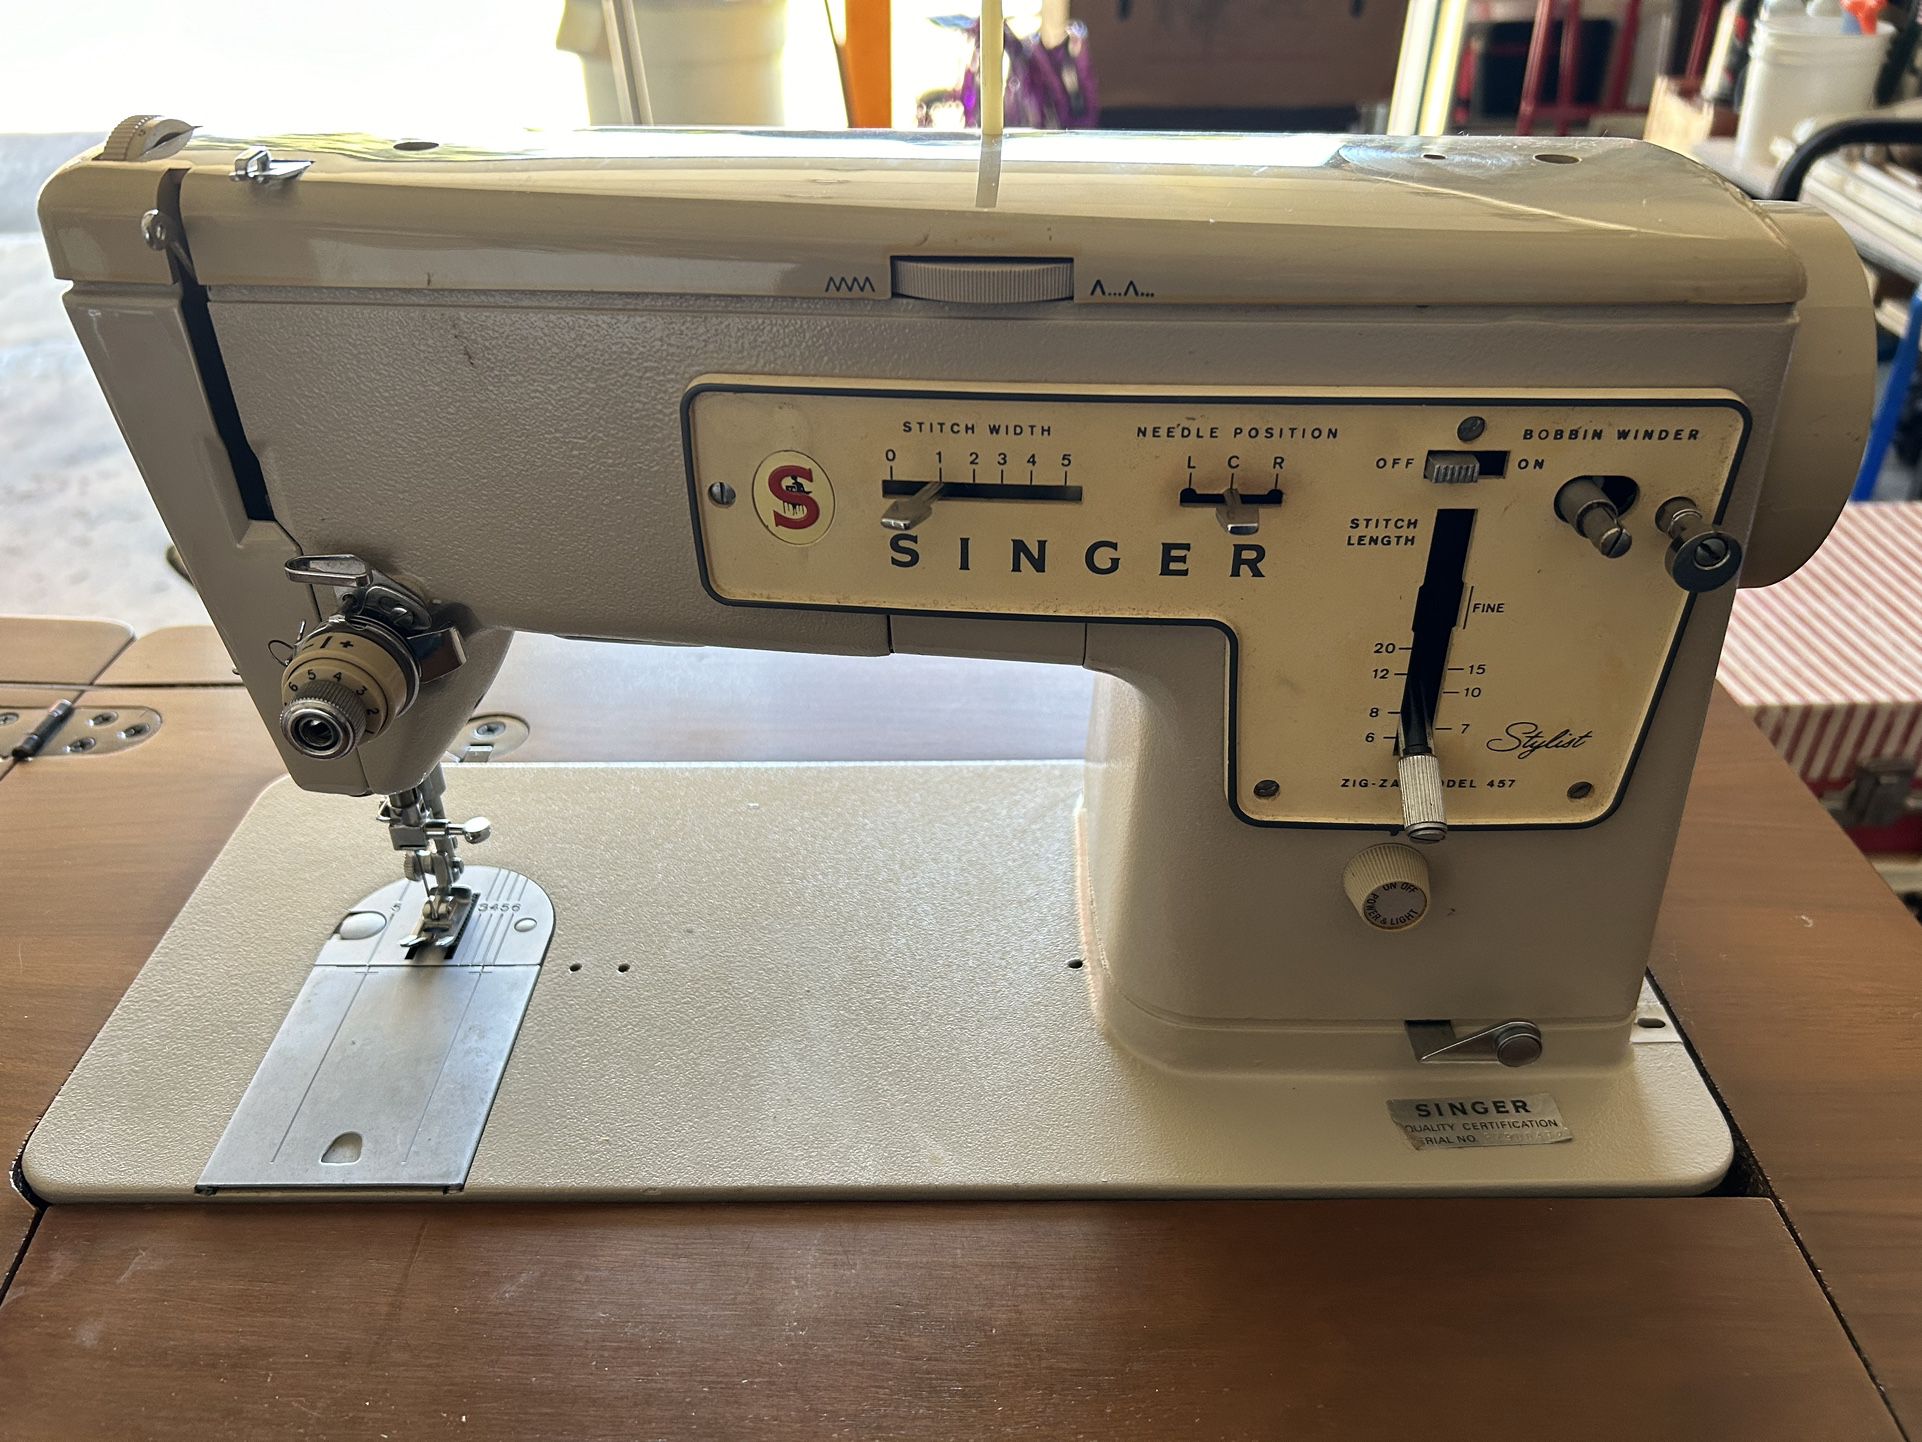 PENDING PICK UP as of 12:42 Pm Singer Sewing 